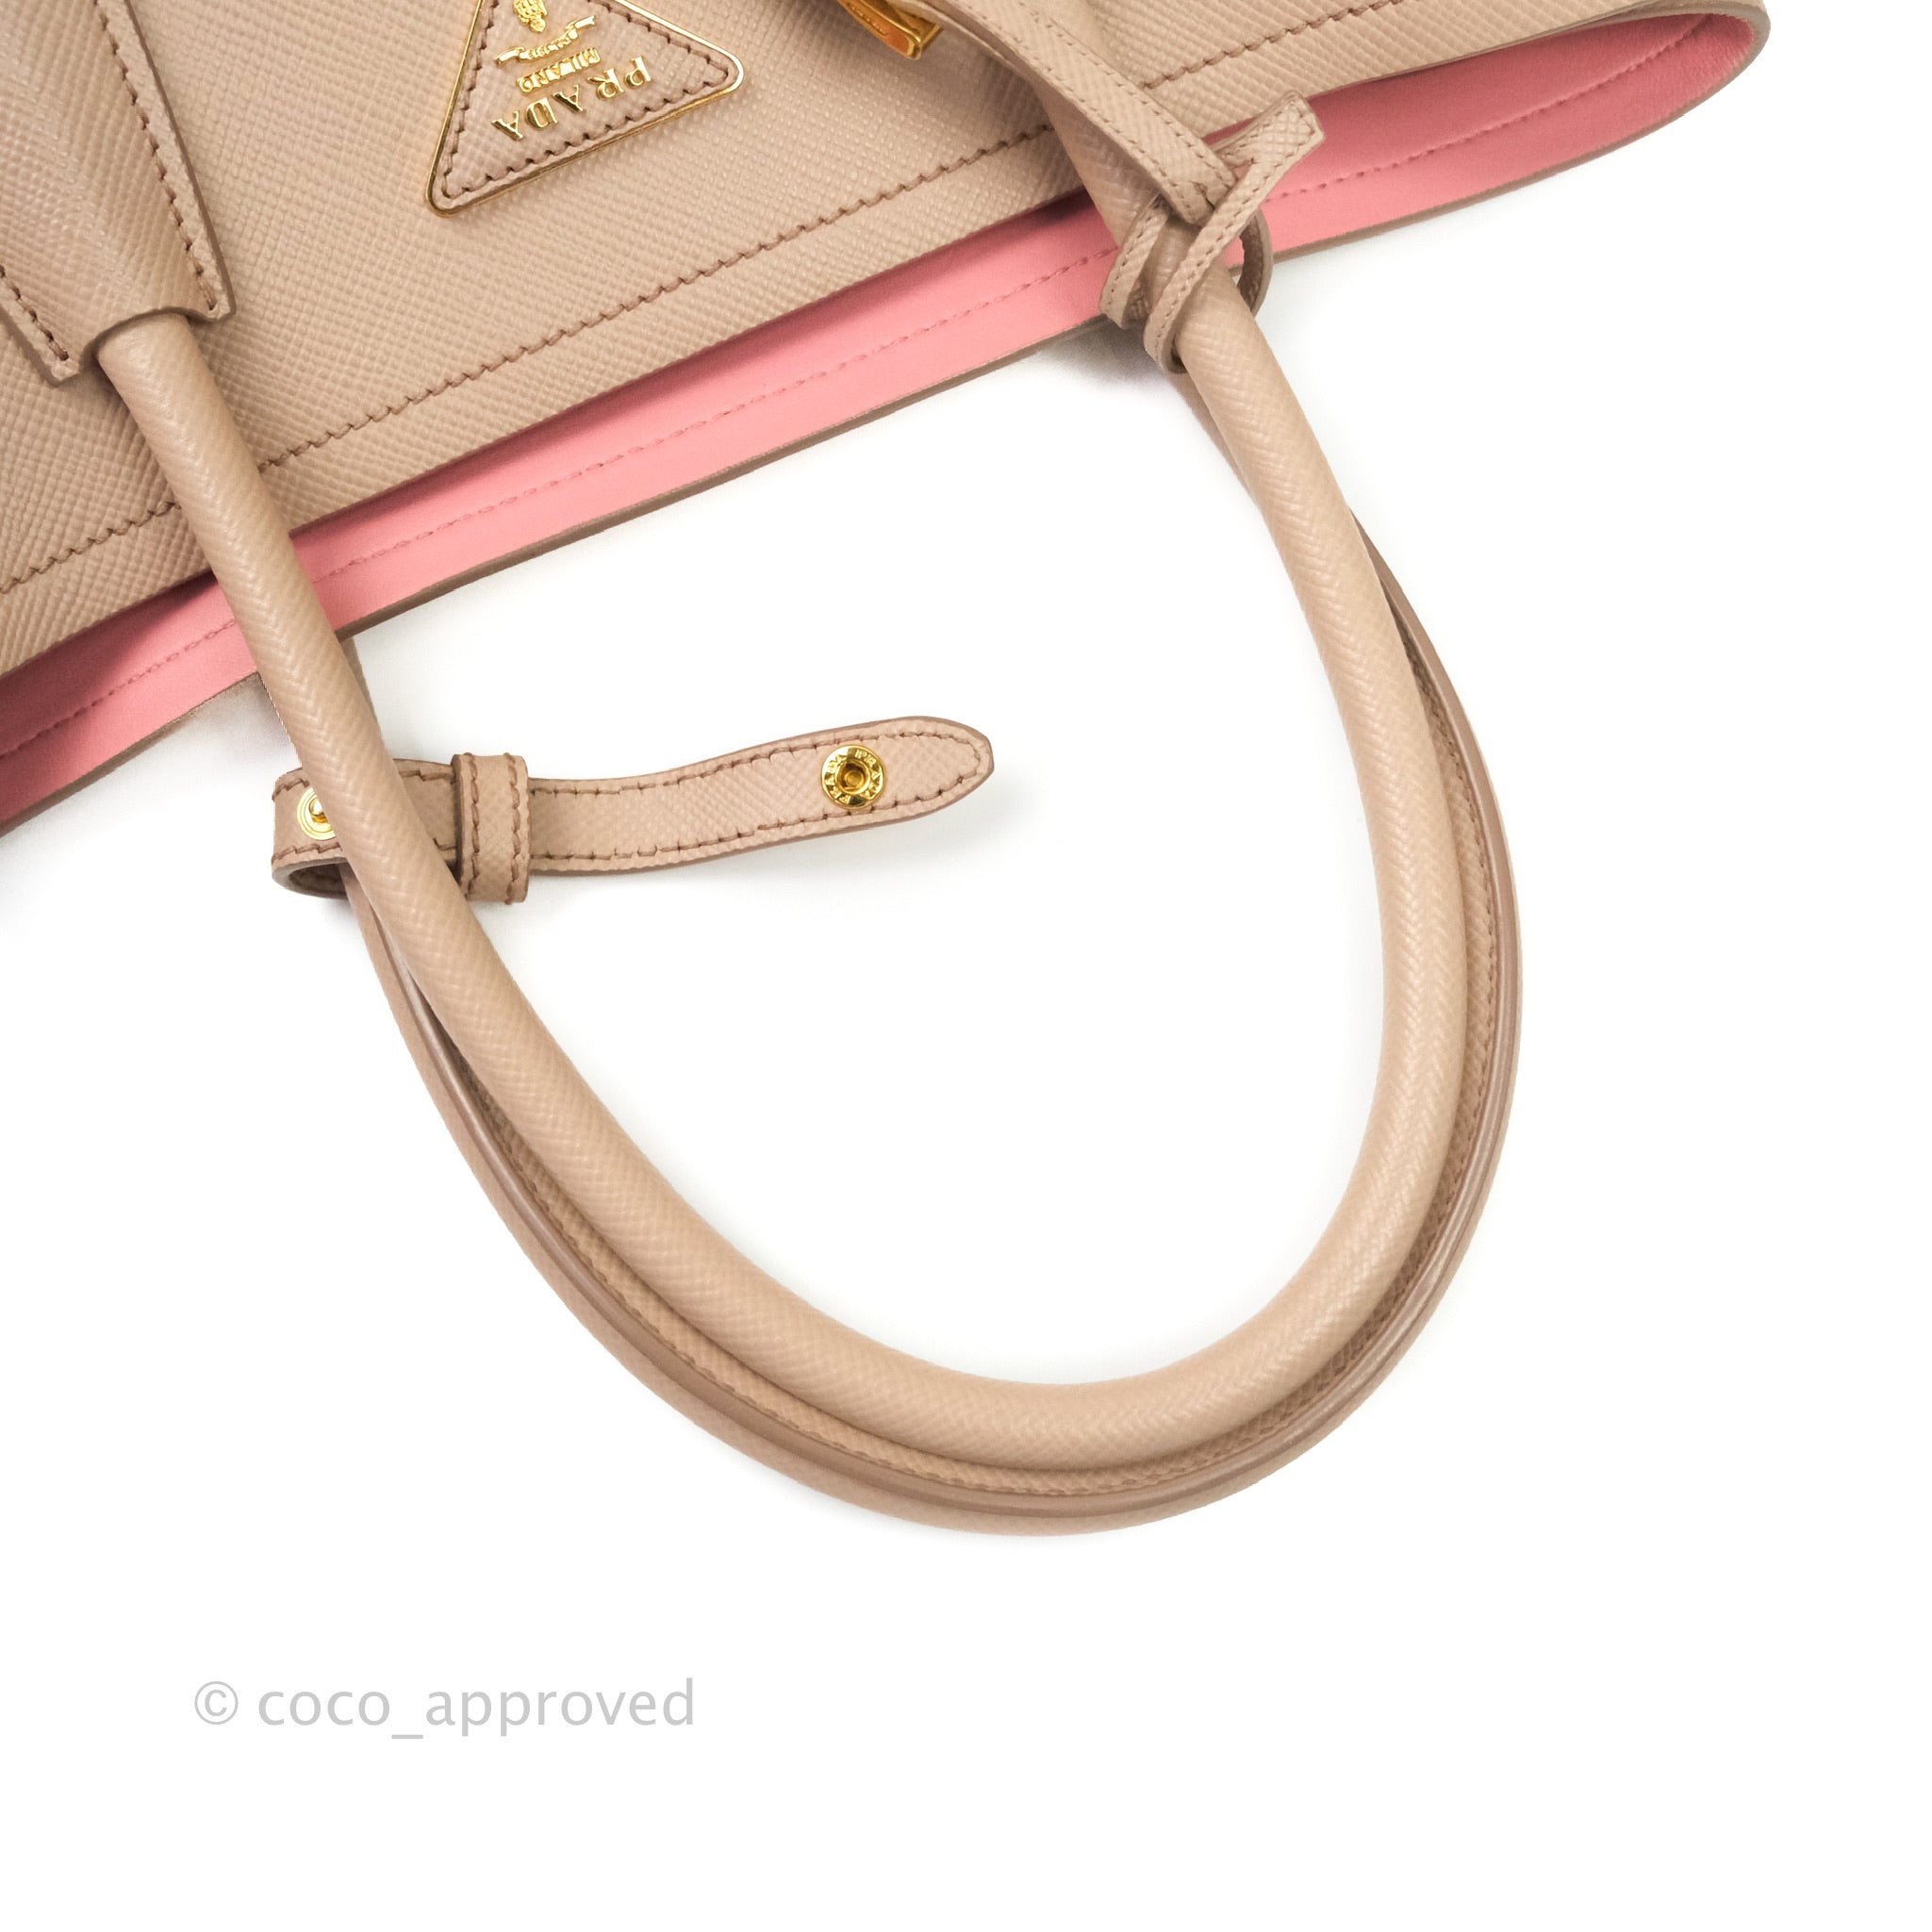 Prada Large Saffiano Cuir Double Prada Bag in Cameo/Rose Gold Hardware –  Coco Approved Studio